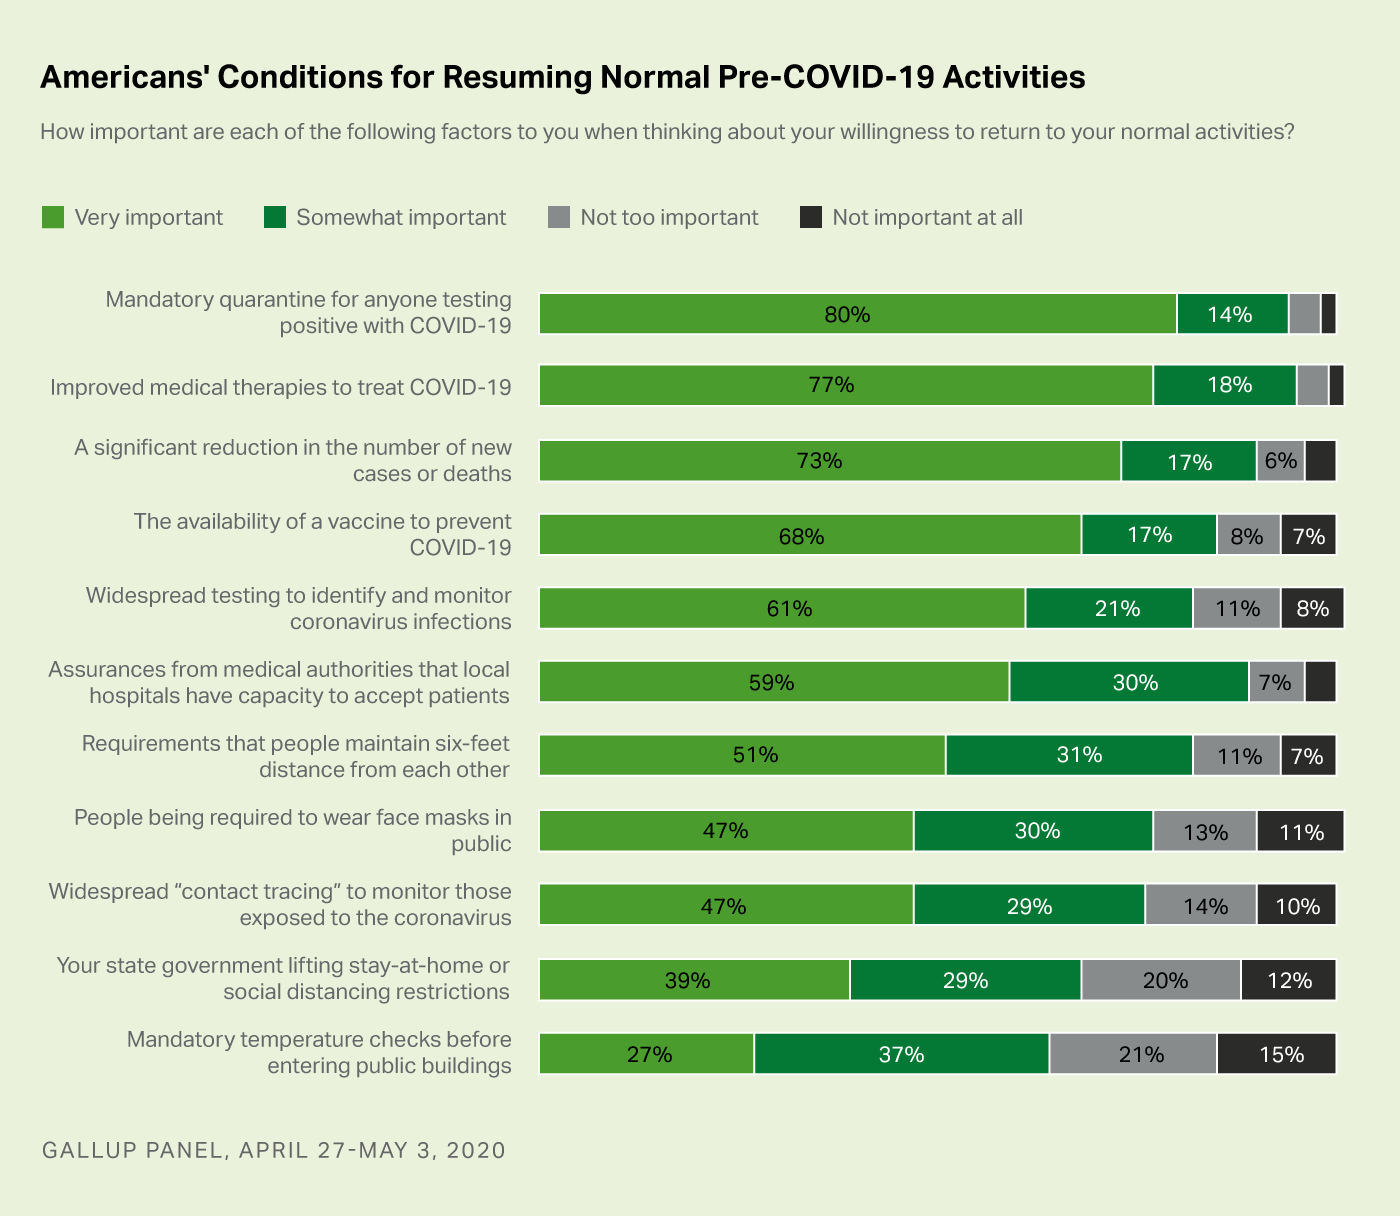 Bar chart. Americans’ views of whether 11 different conditions need to be met in order for them to be willing to return to normal activities.